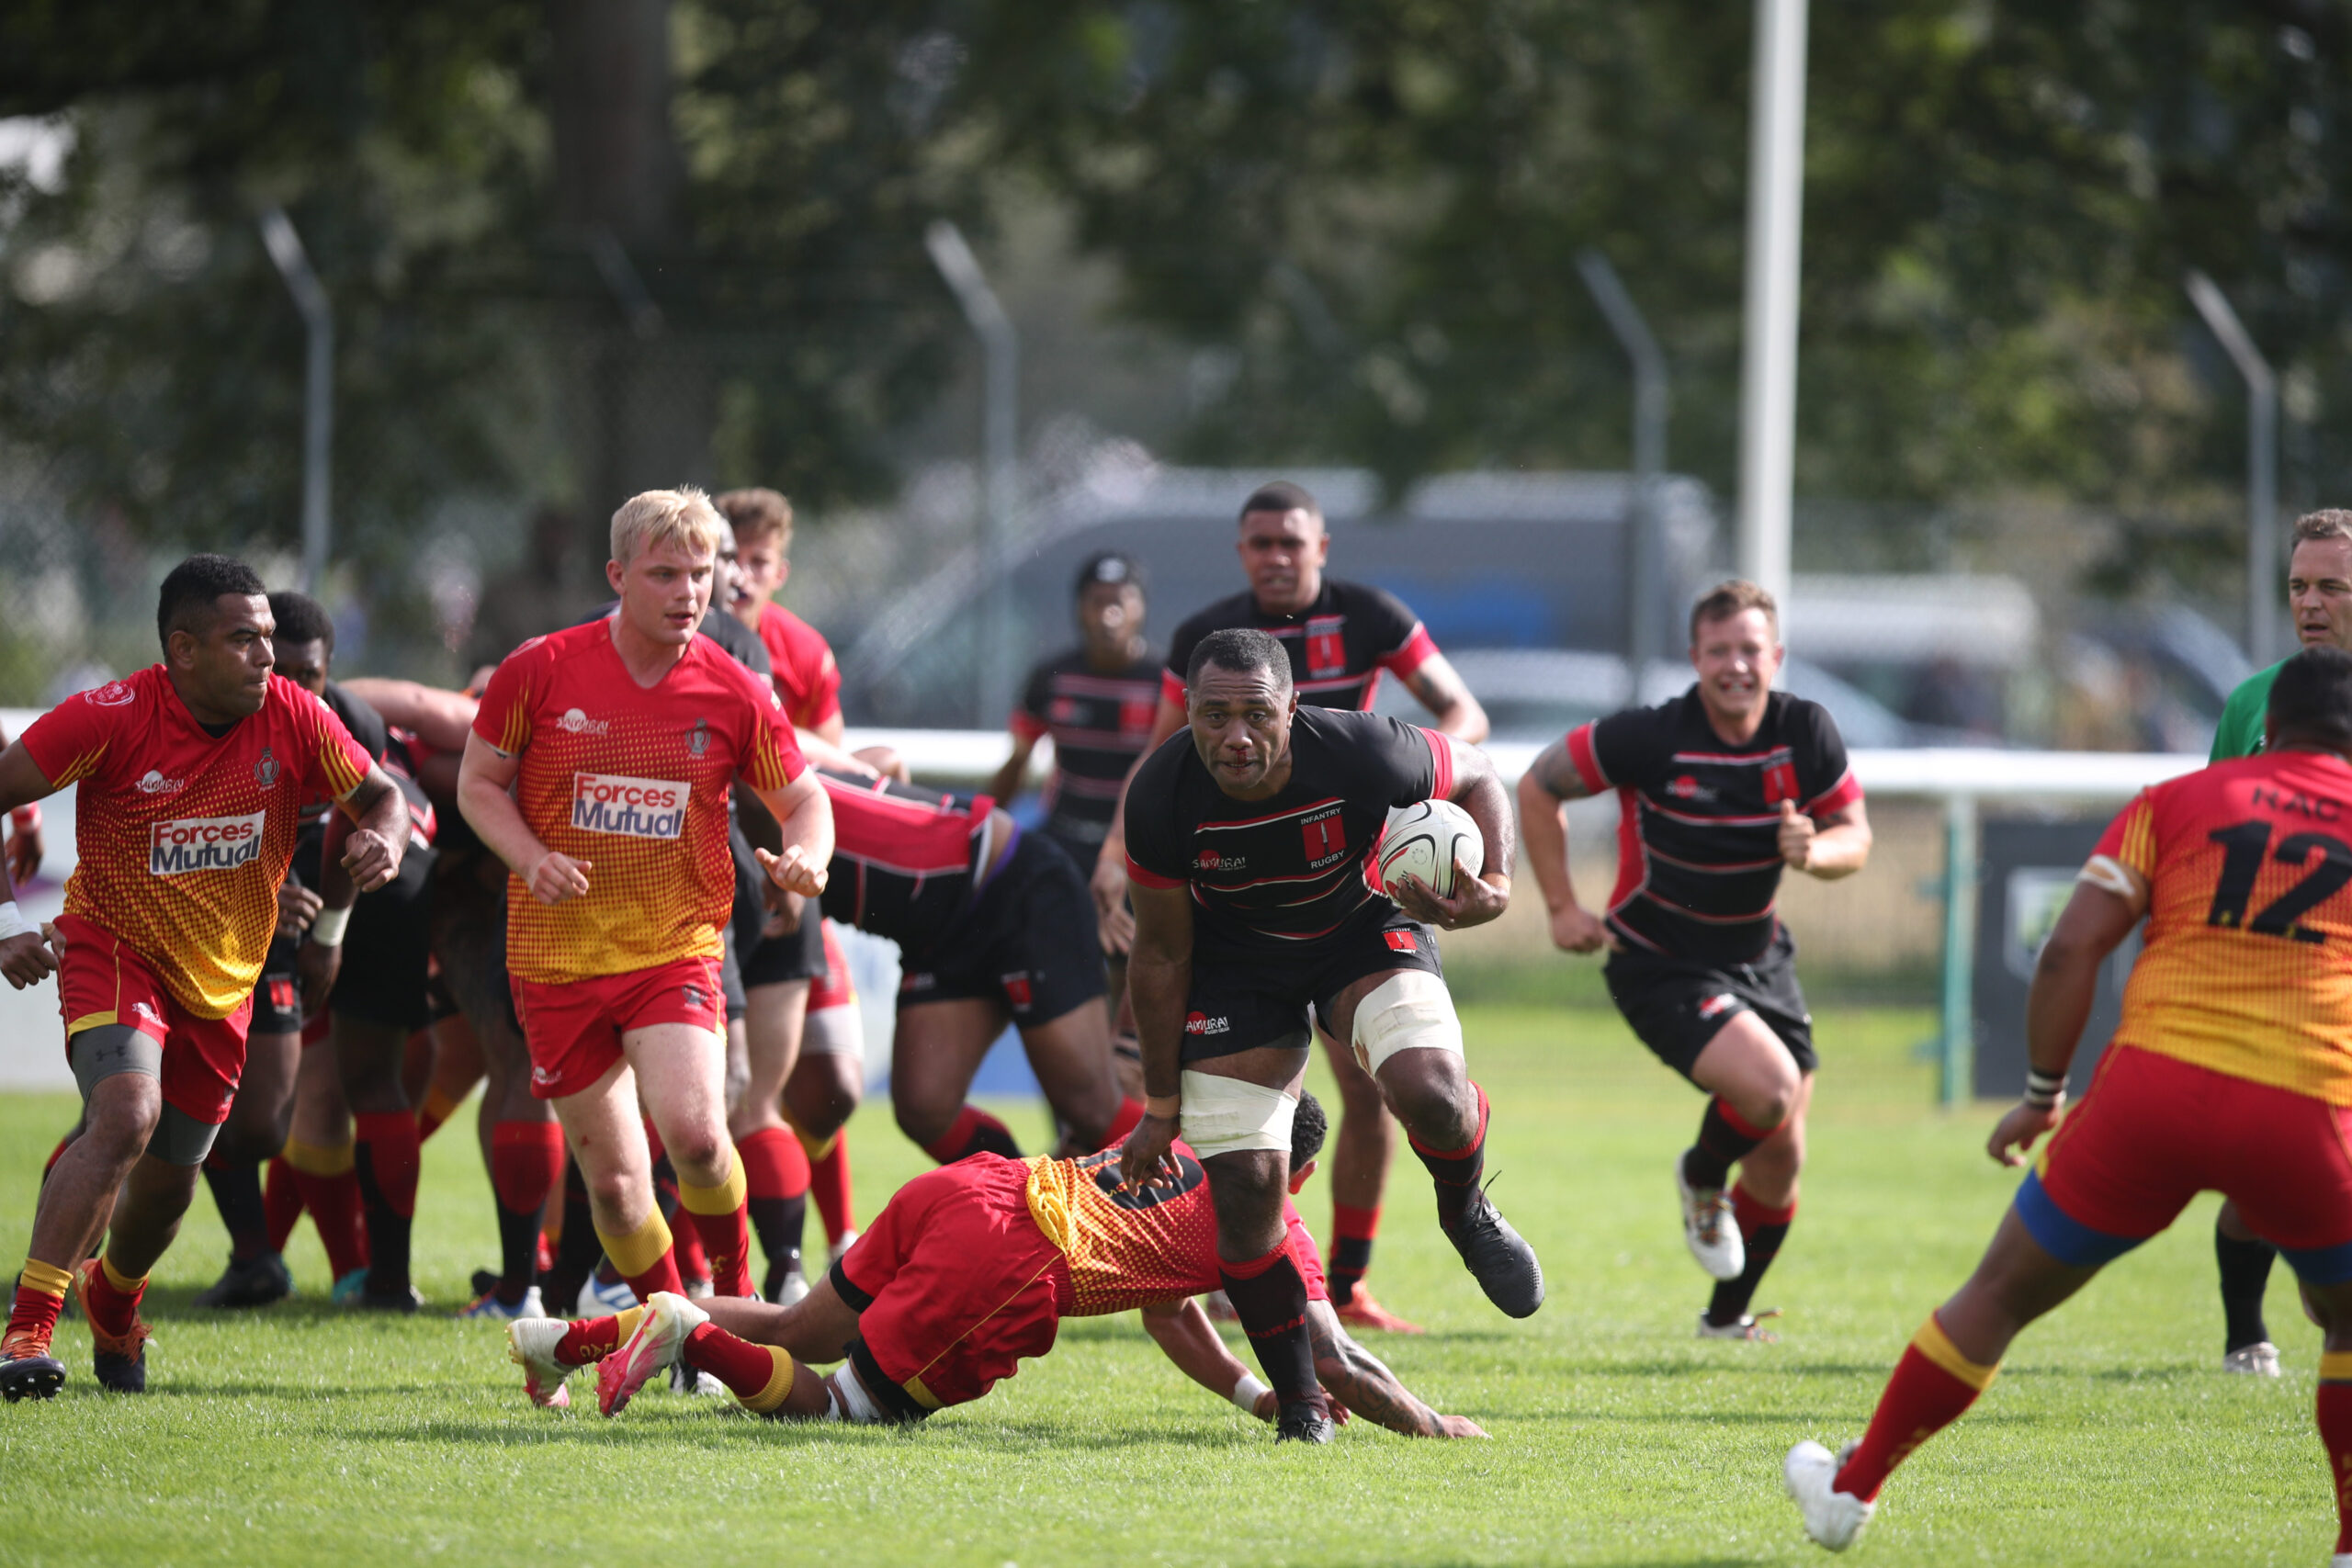 Adaptive laws and summer Sevens helps springboard Corps rugby into new season